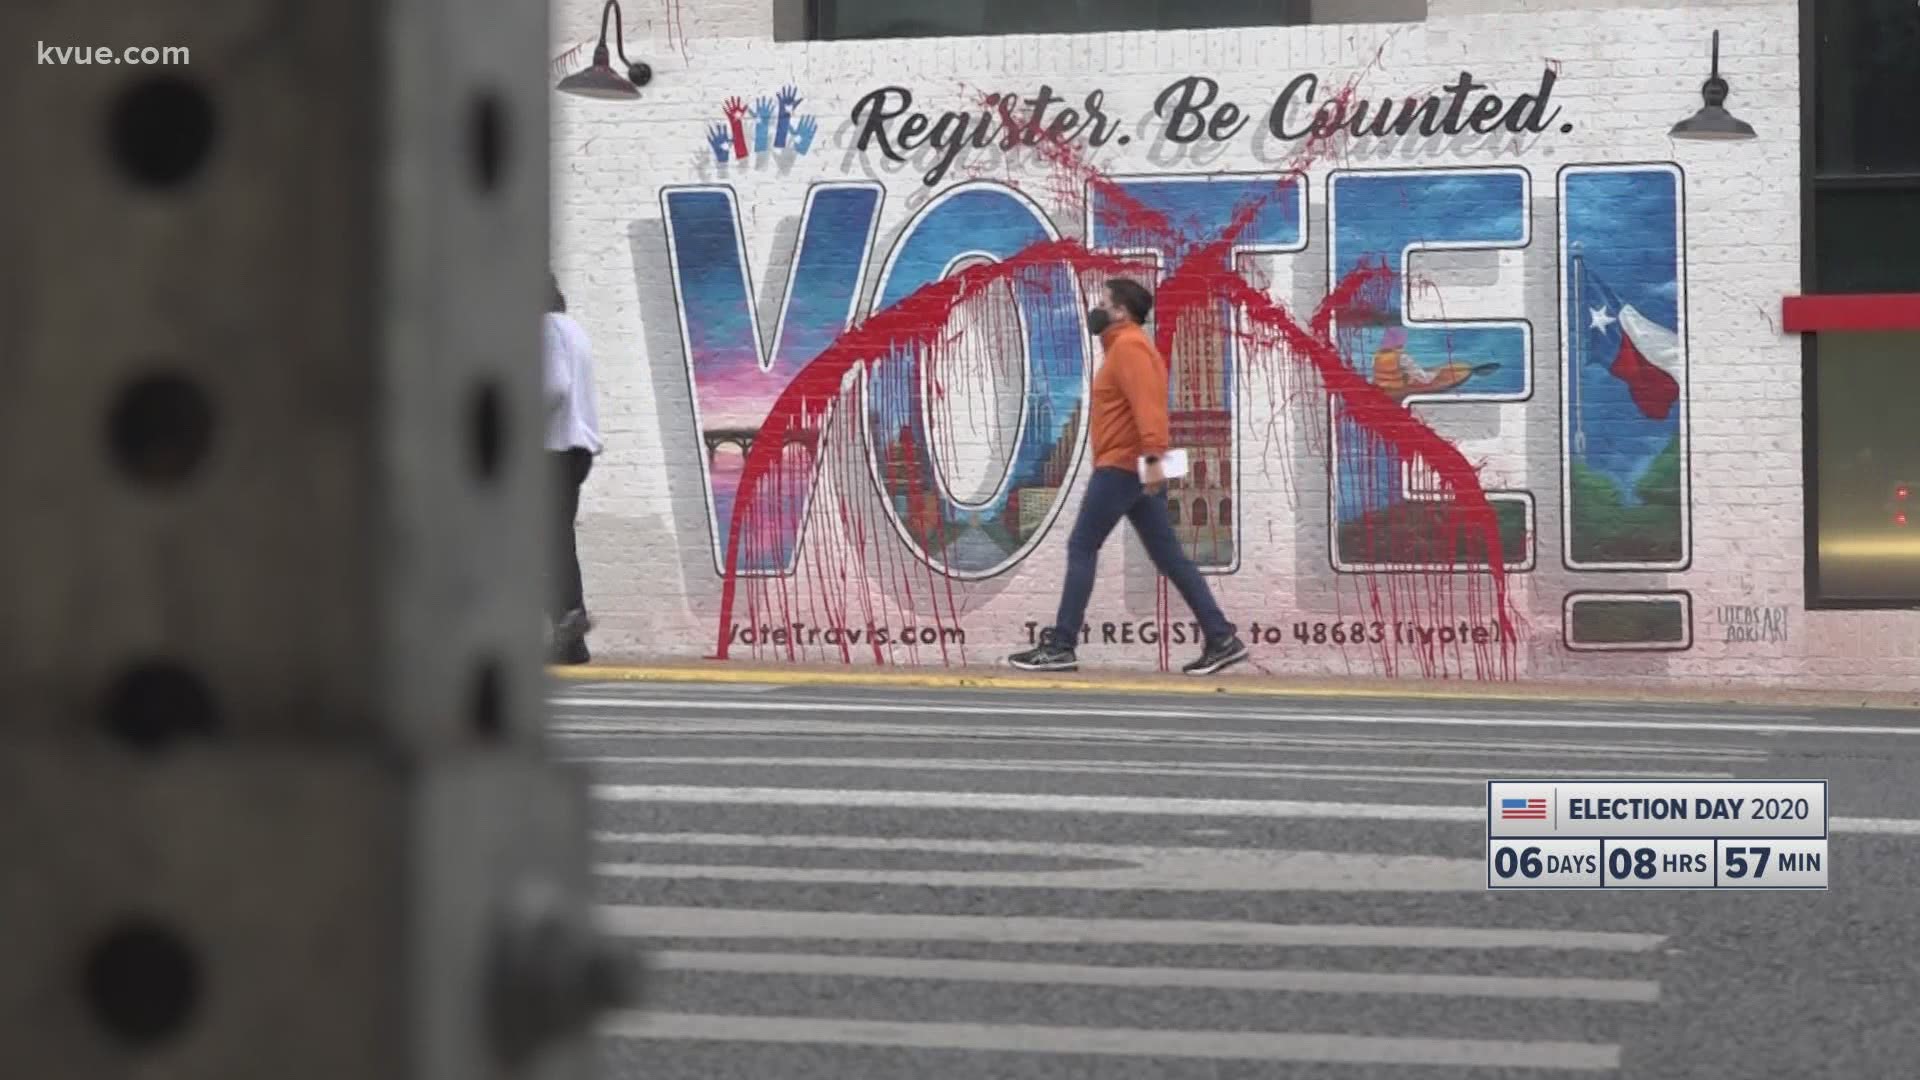 Vandals have targeted an Austin polling place and murals encouraging voting, raising some questions about election security.